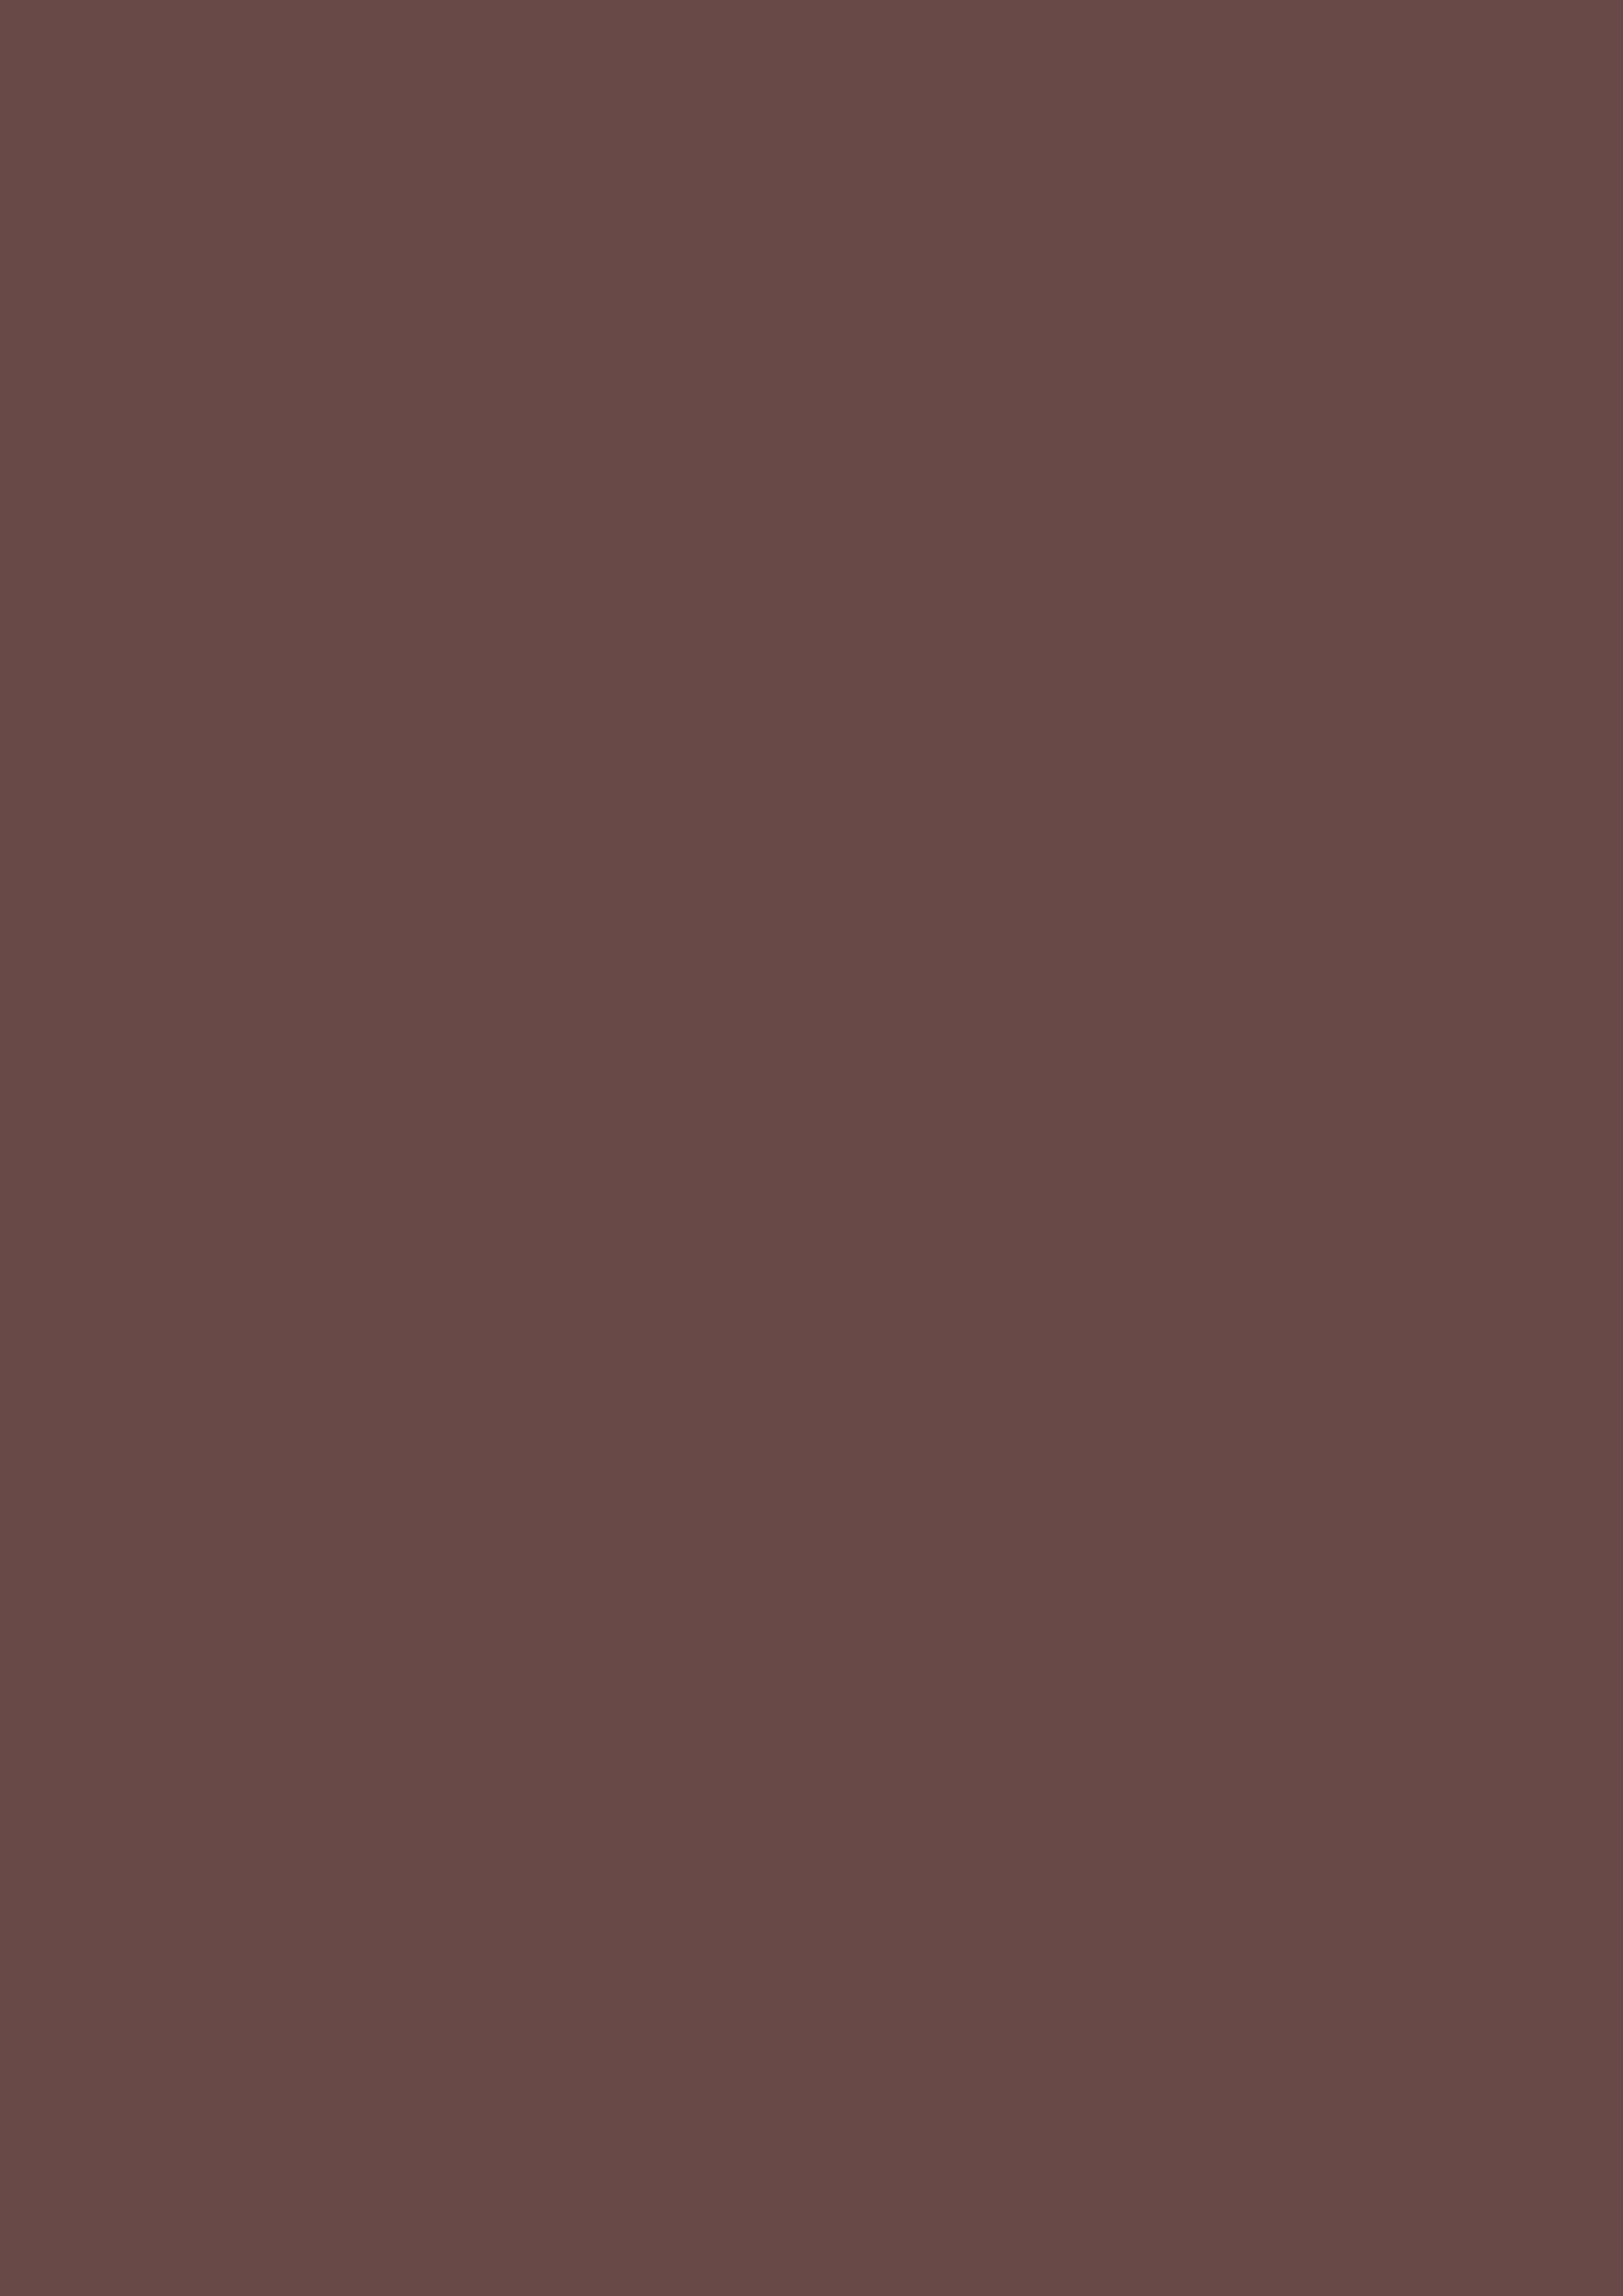 2480x3508 Rose Ebony Solid Color Background